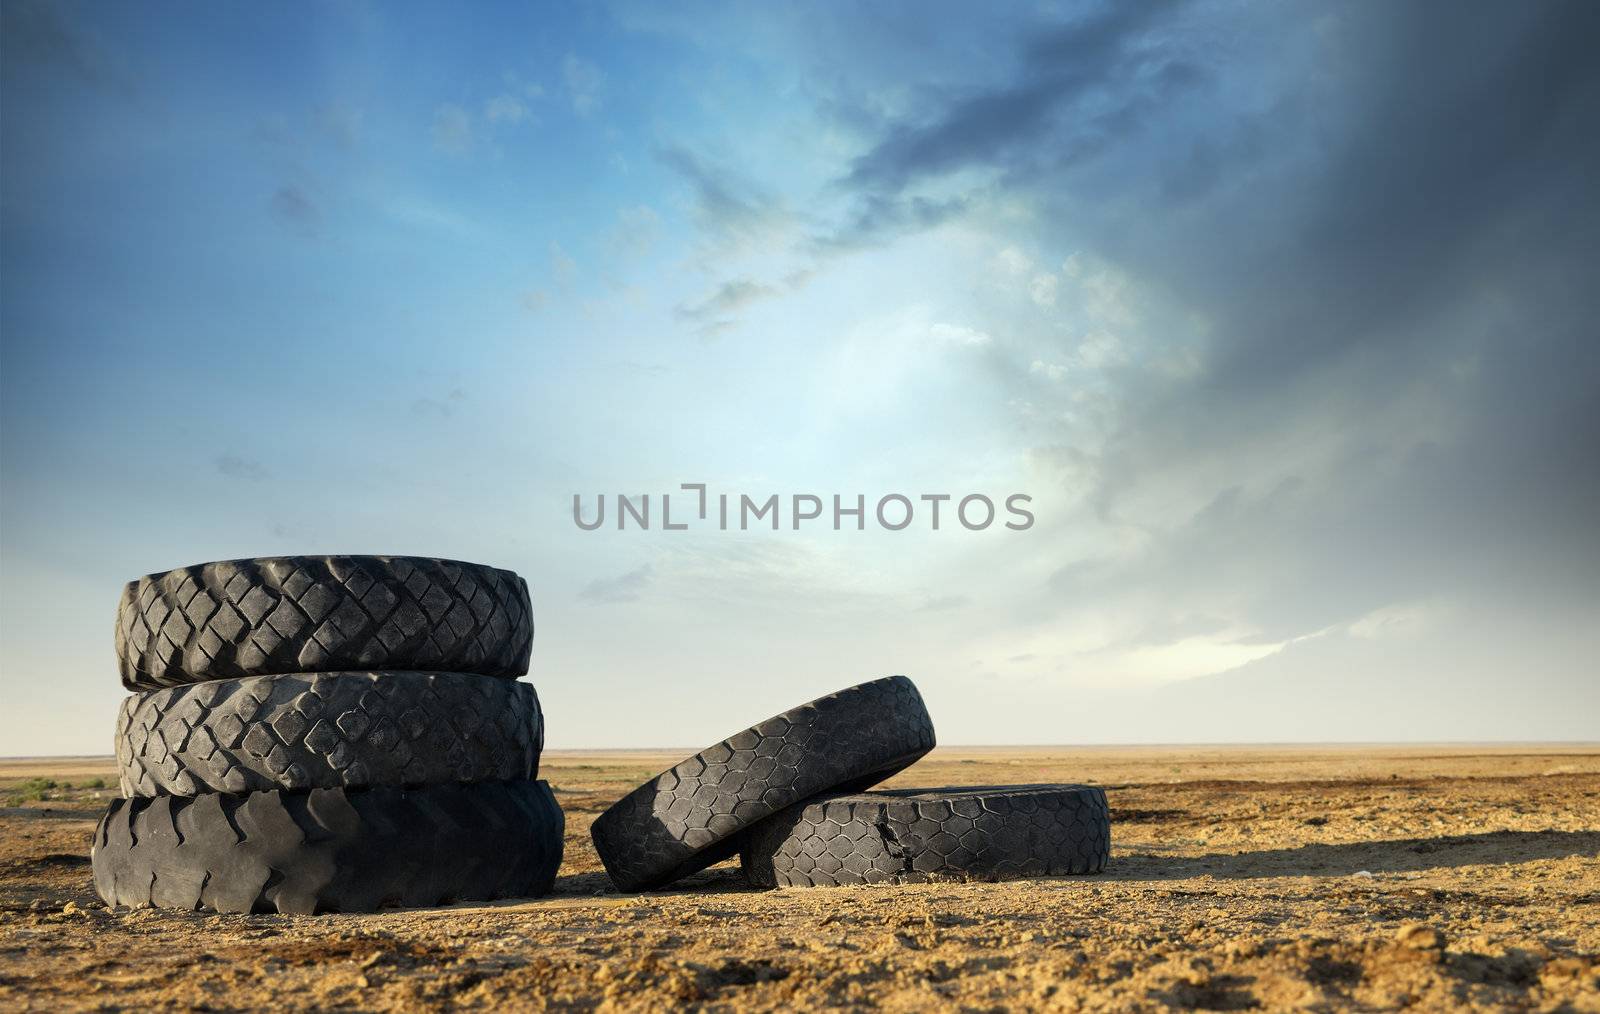 Five abandoned tires outdoors as a symbol of environmental pollution